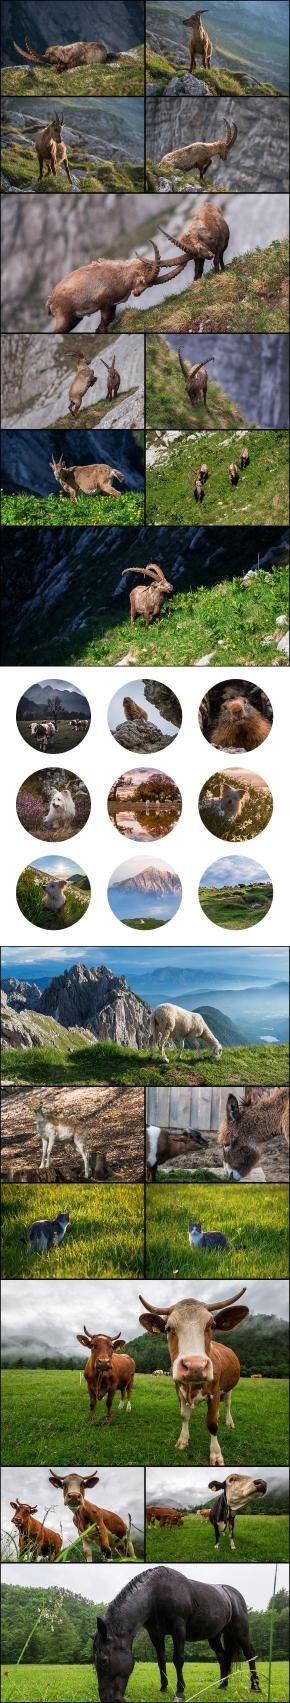 Collage of high resolution images of animals